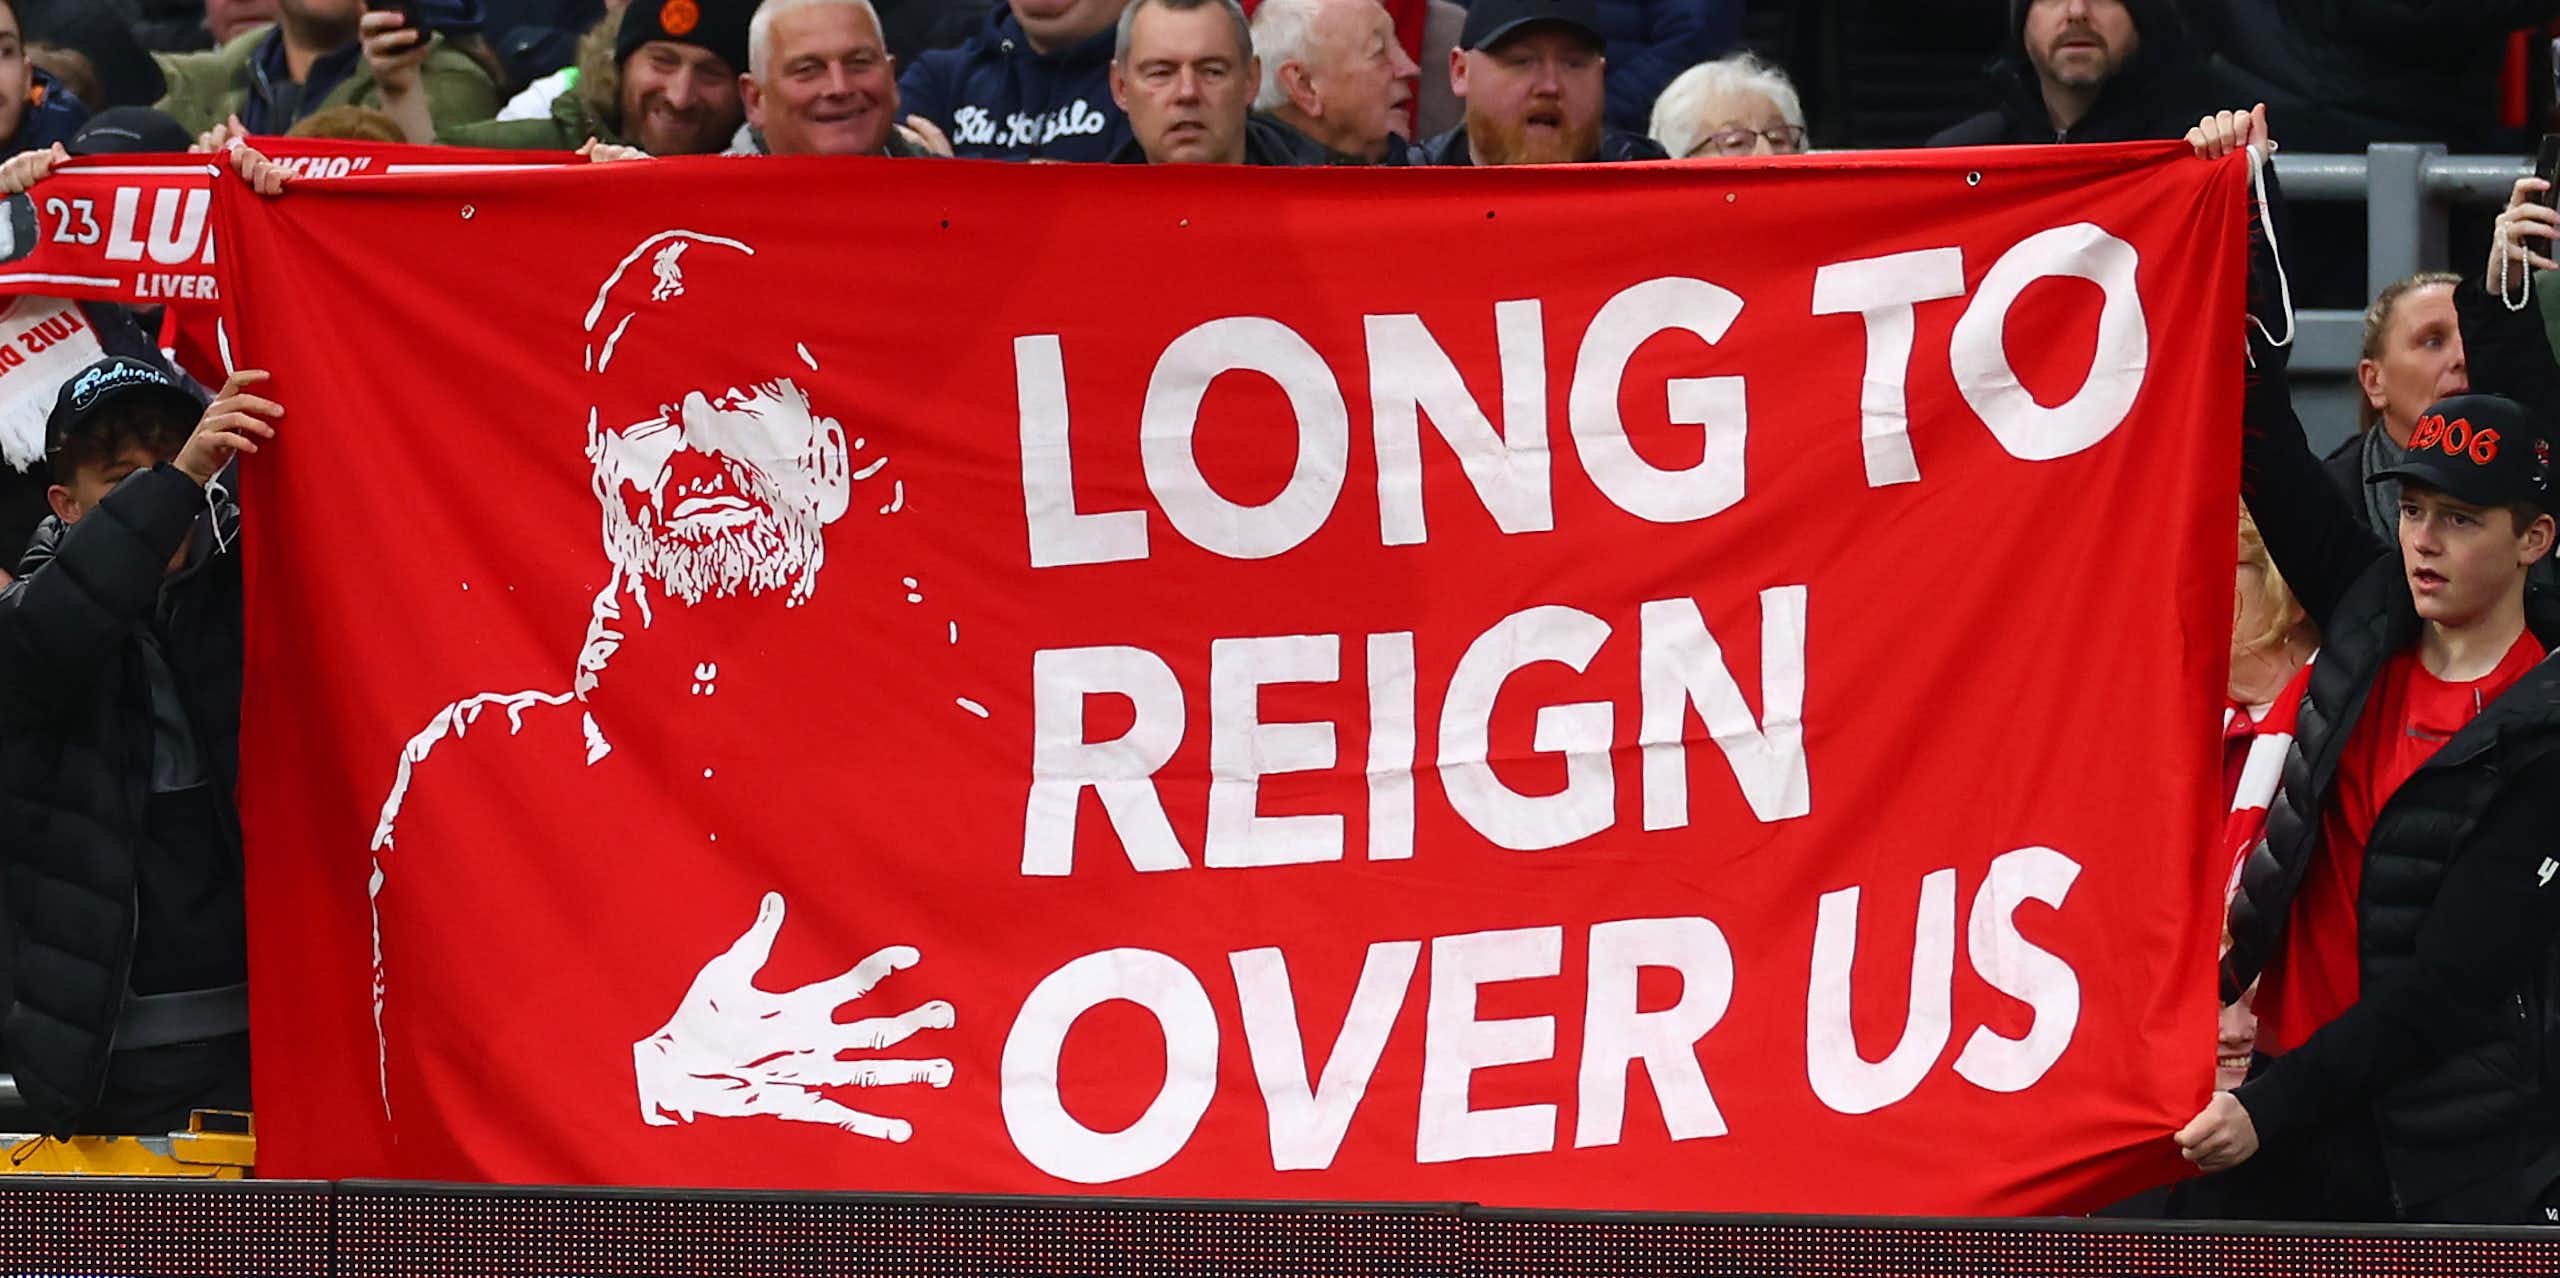 A group of Liverpool FC supporters hold up a large red and white banner depicting an image of manager Jurgen Klopp and the words 'Long to reign over us'